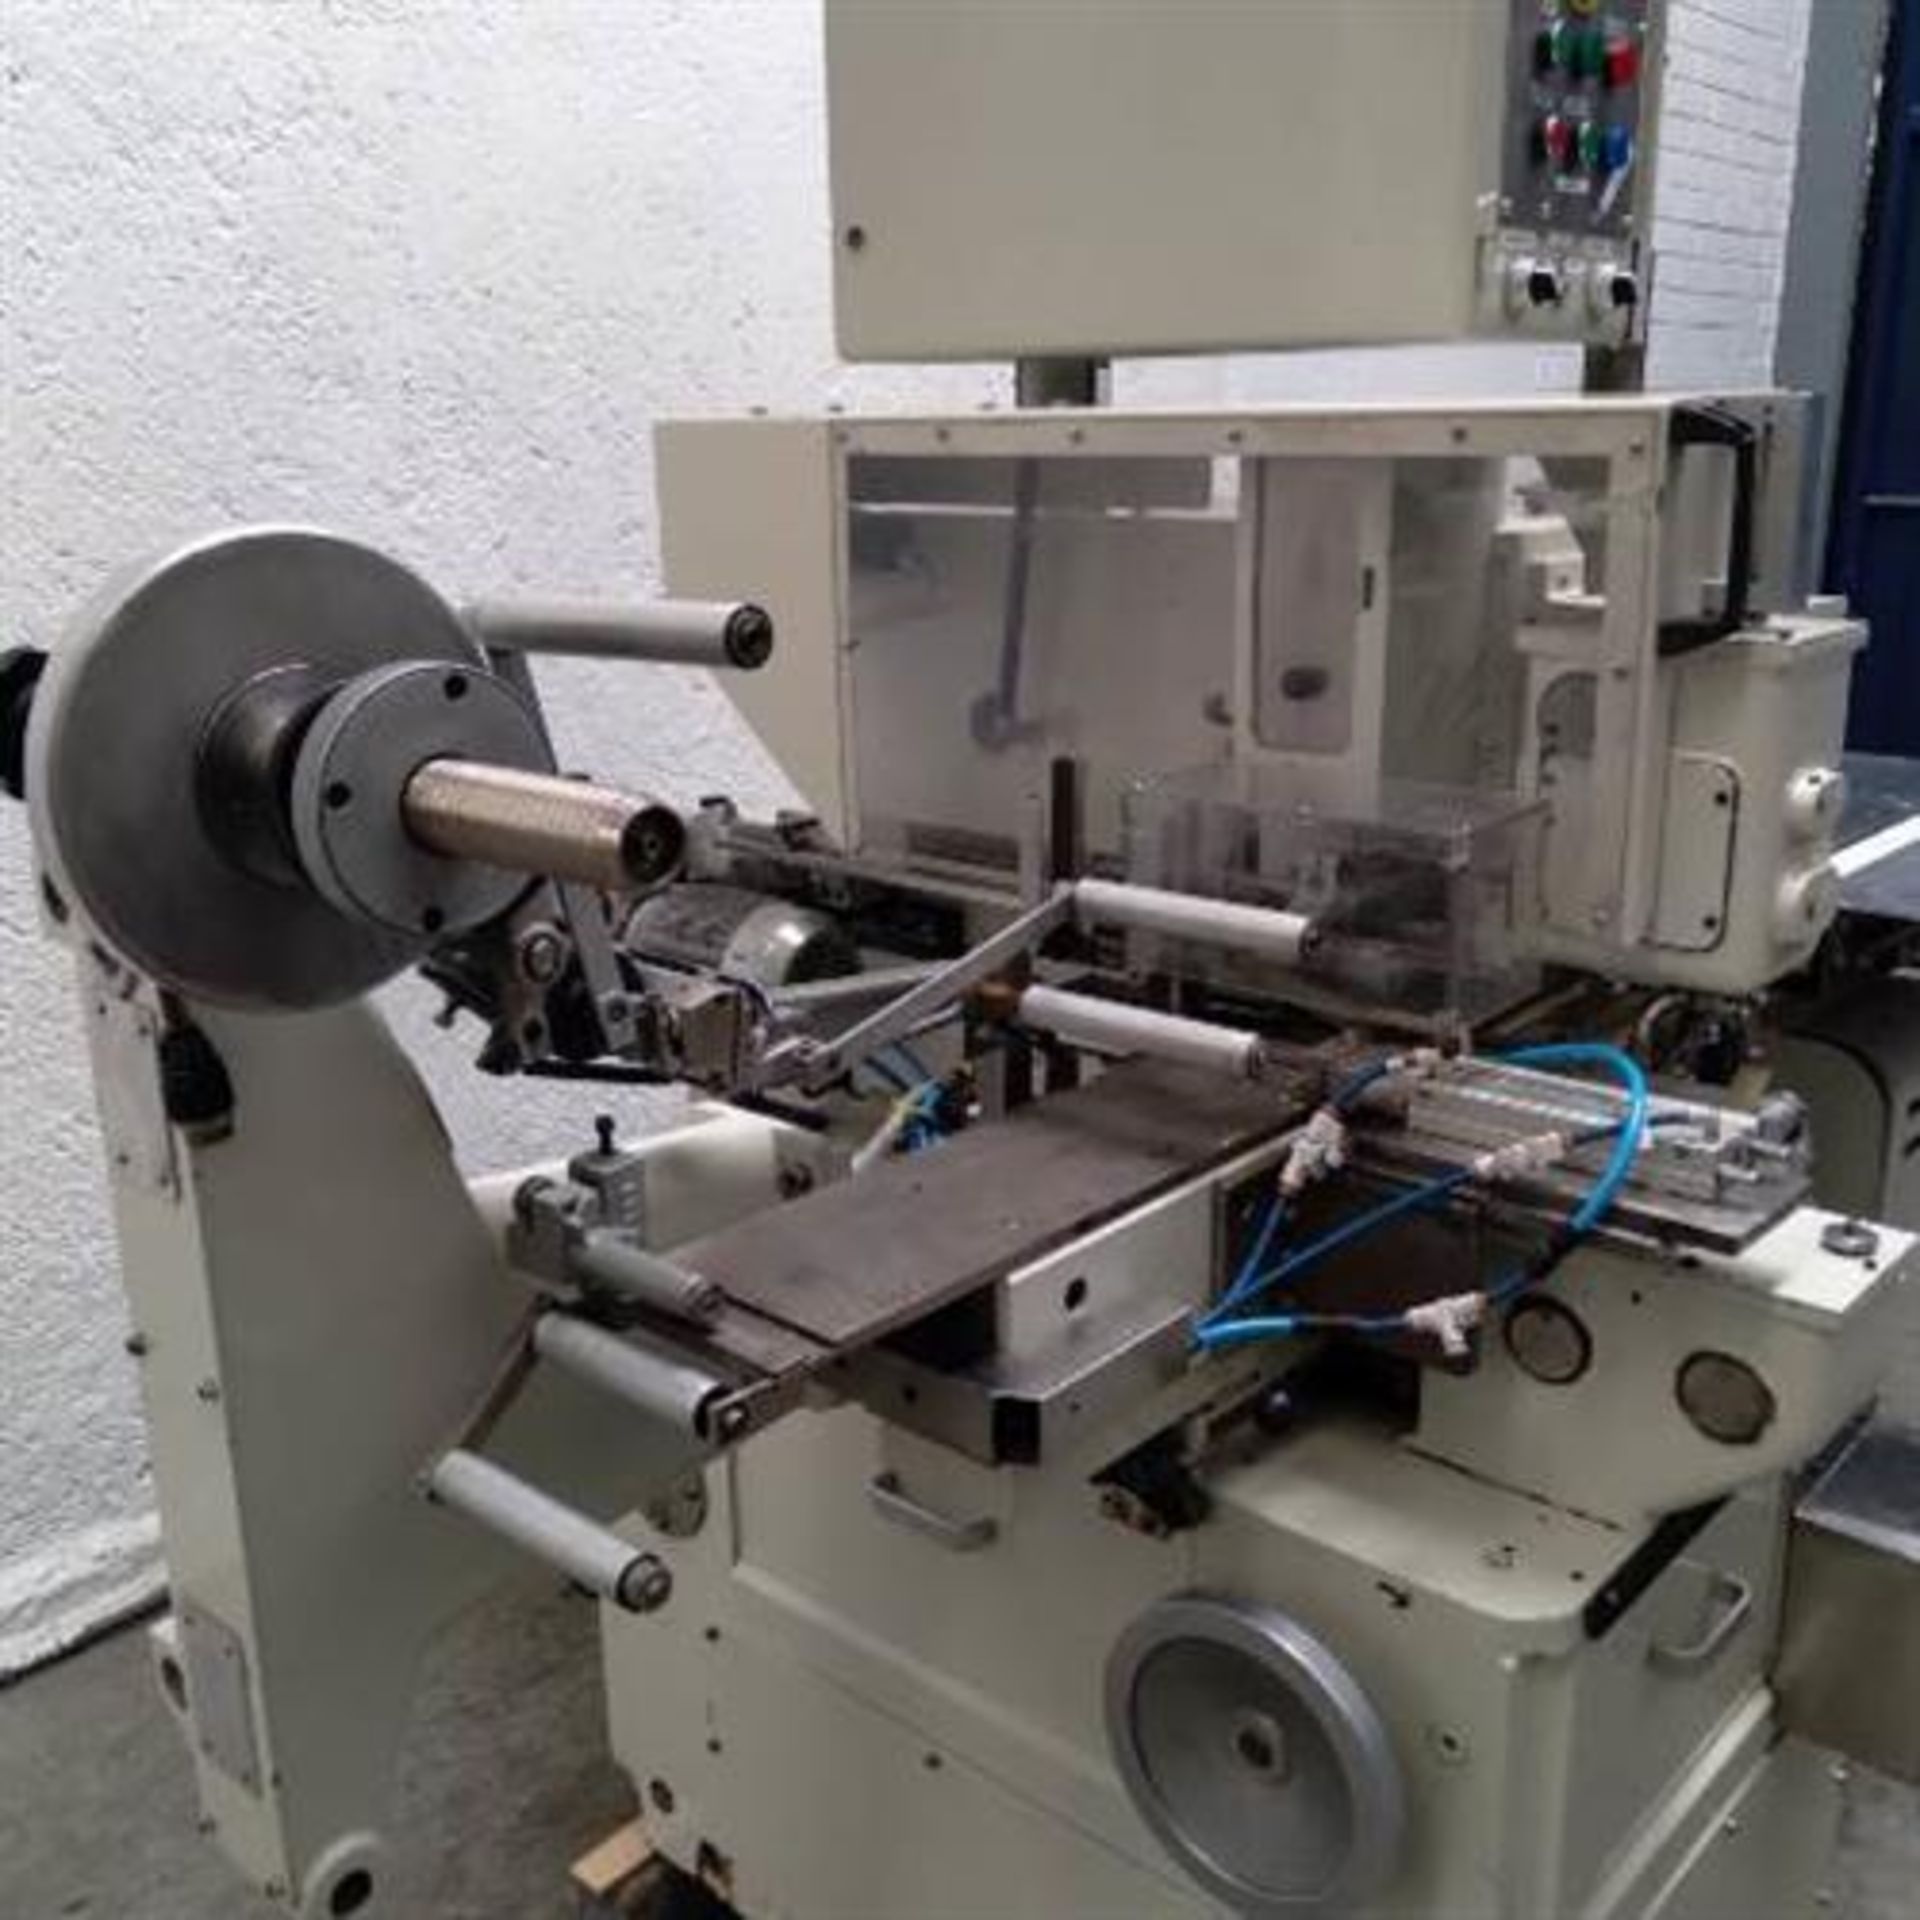 Sapal model Bi-b Die Fold Wrapper - Serial number 10911/1988 - Built new in 1988 - Set for a piece - Image 5 of 8